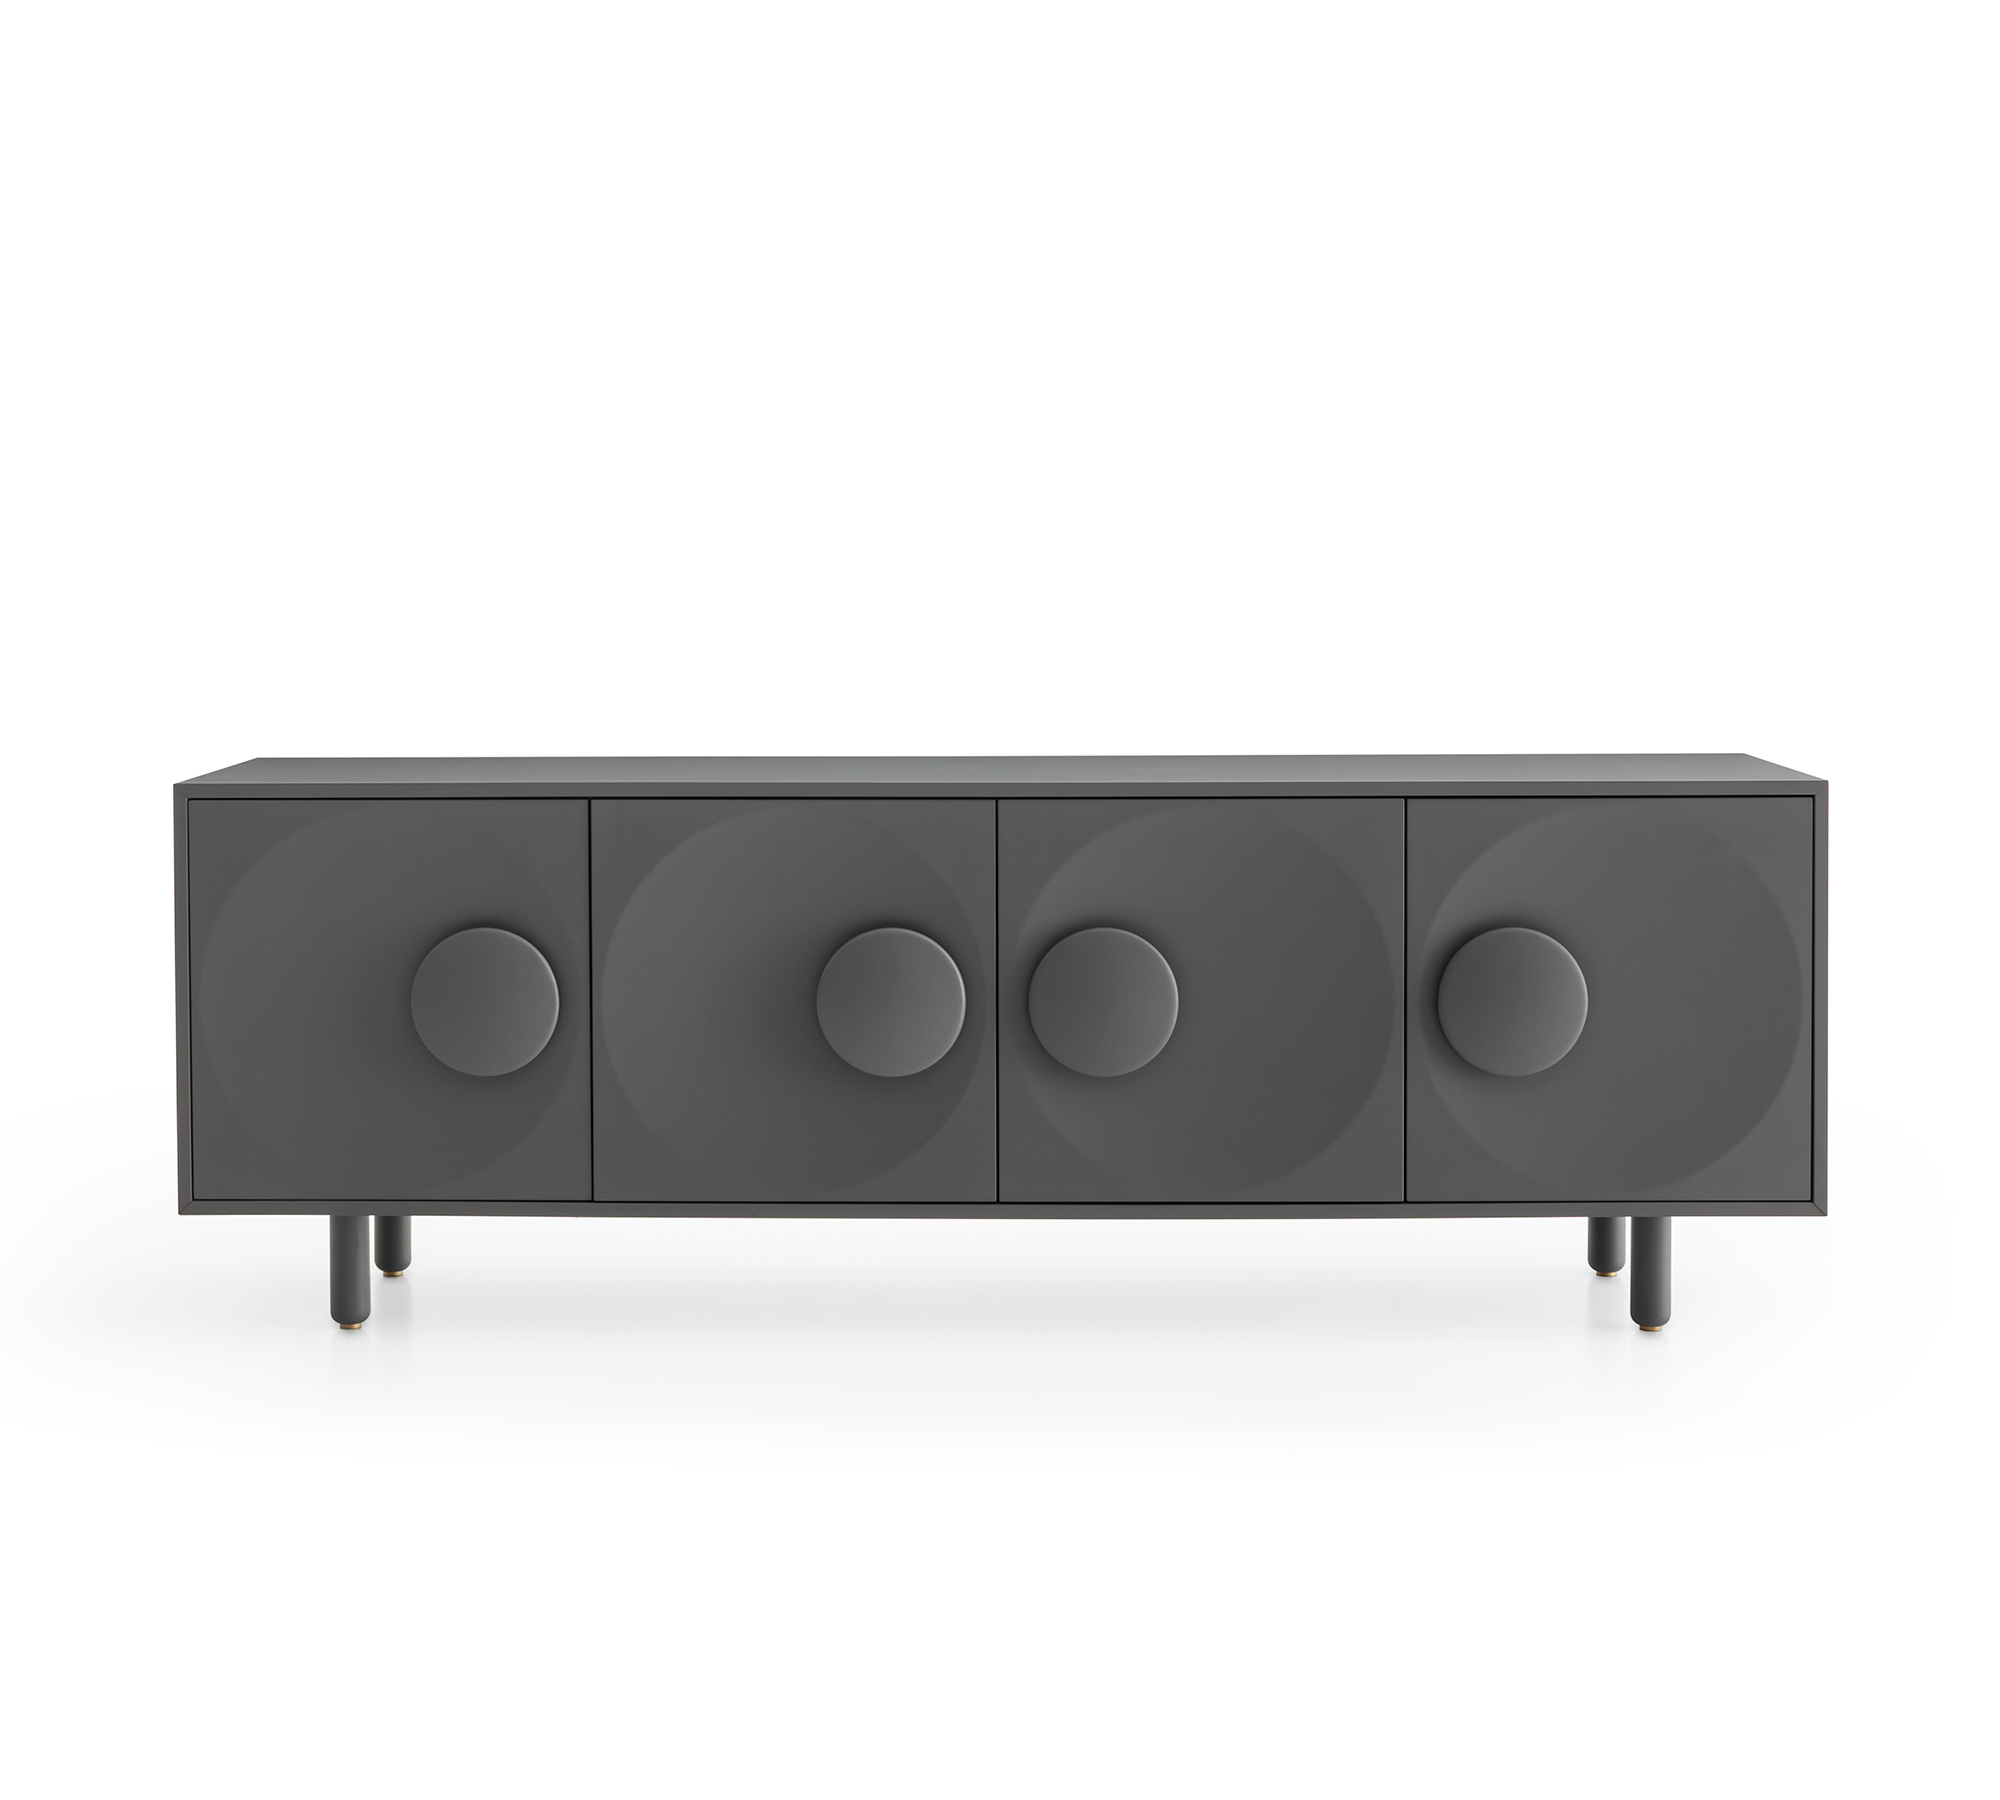 Modern sideboard in grey laquered wood with 4 doors by Morica Design